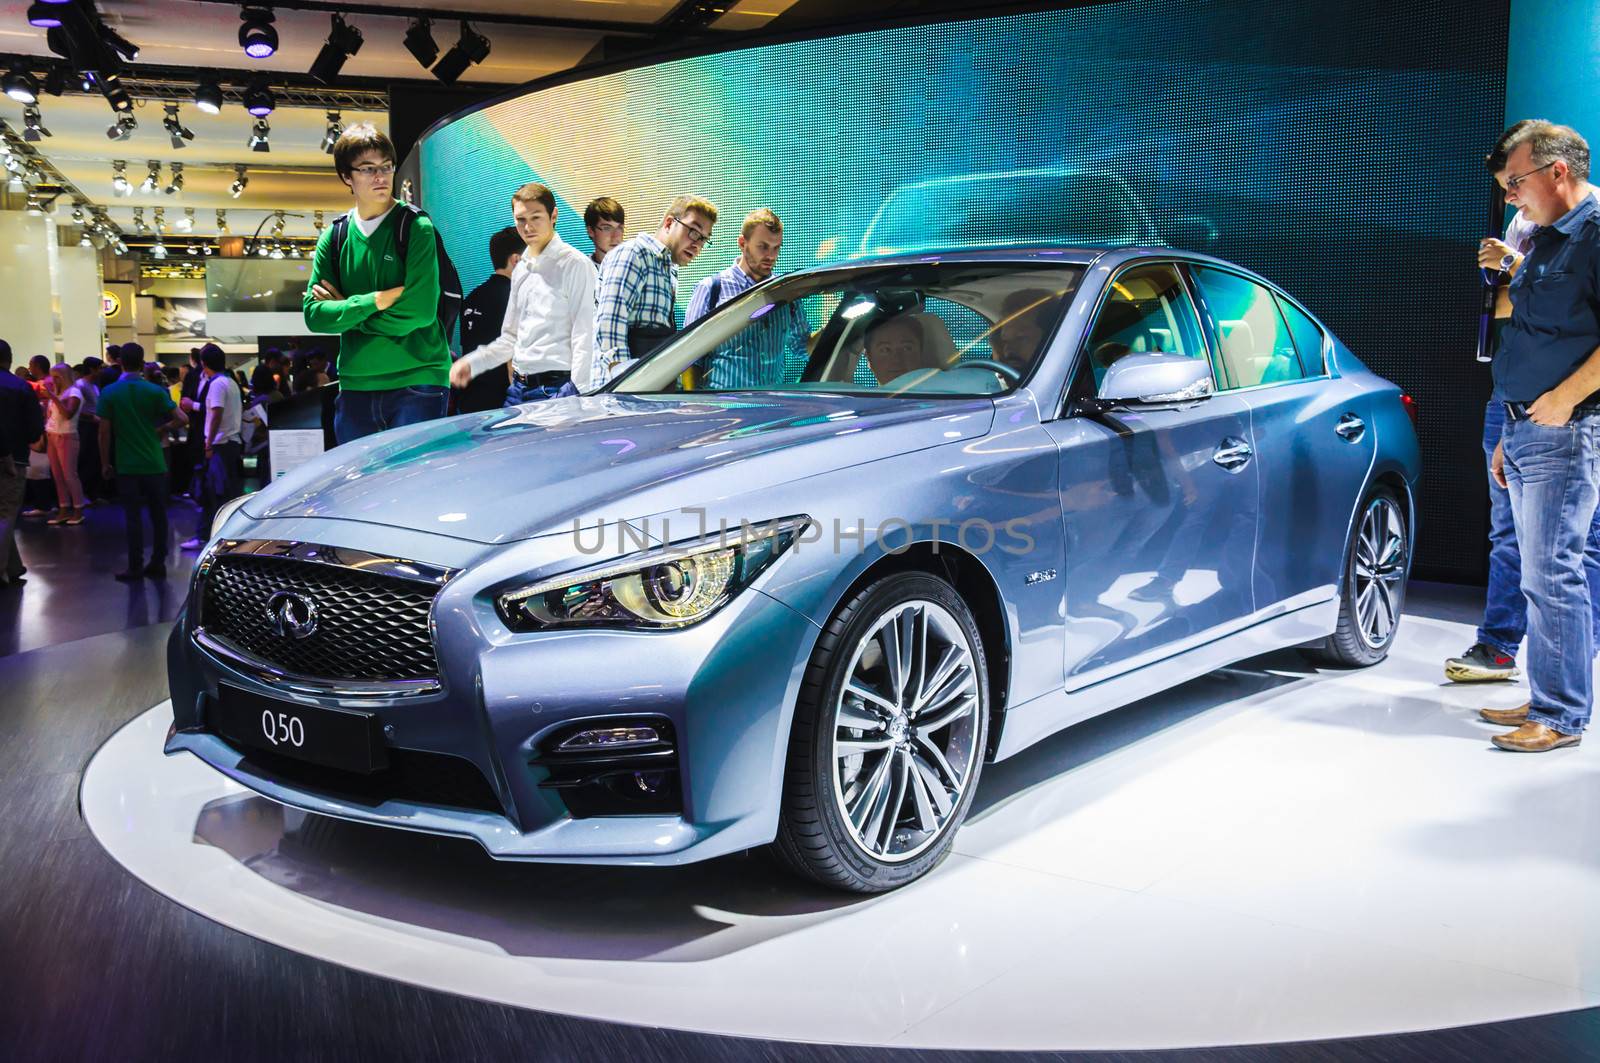 FRANKFURT - SEPT 21: INIFINITY Q50 presented as world premiere at the 65th IAA (Internationale Automobil Ausstellung) on September 21, 2013 in Frankfurt, Germany